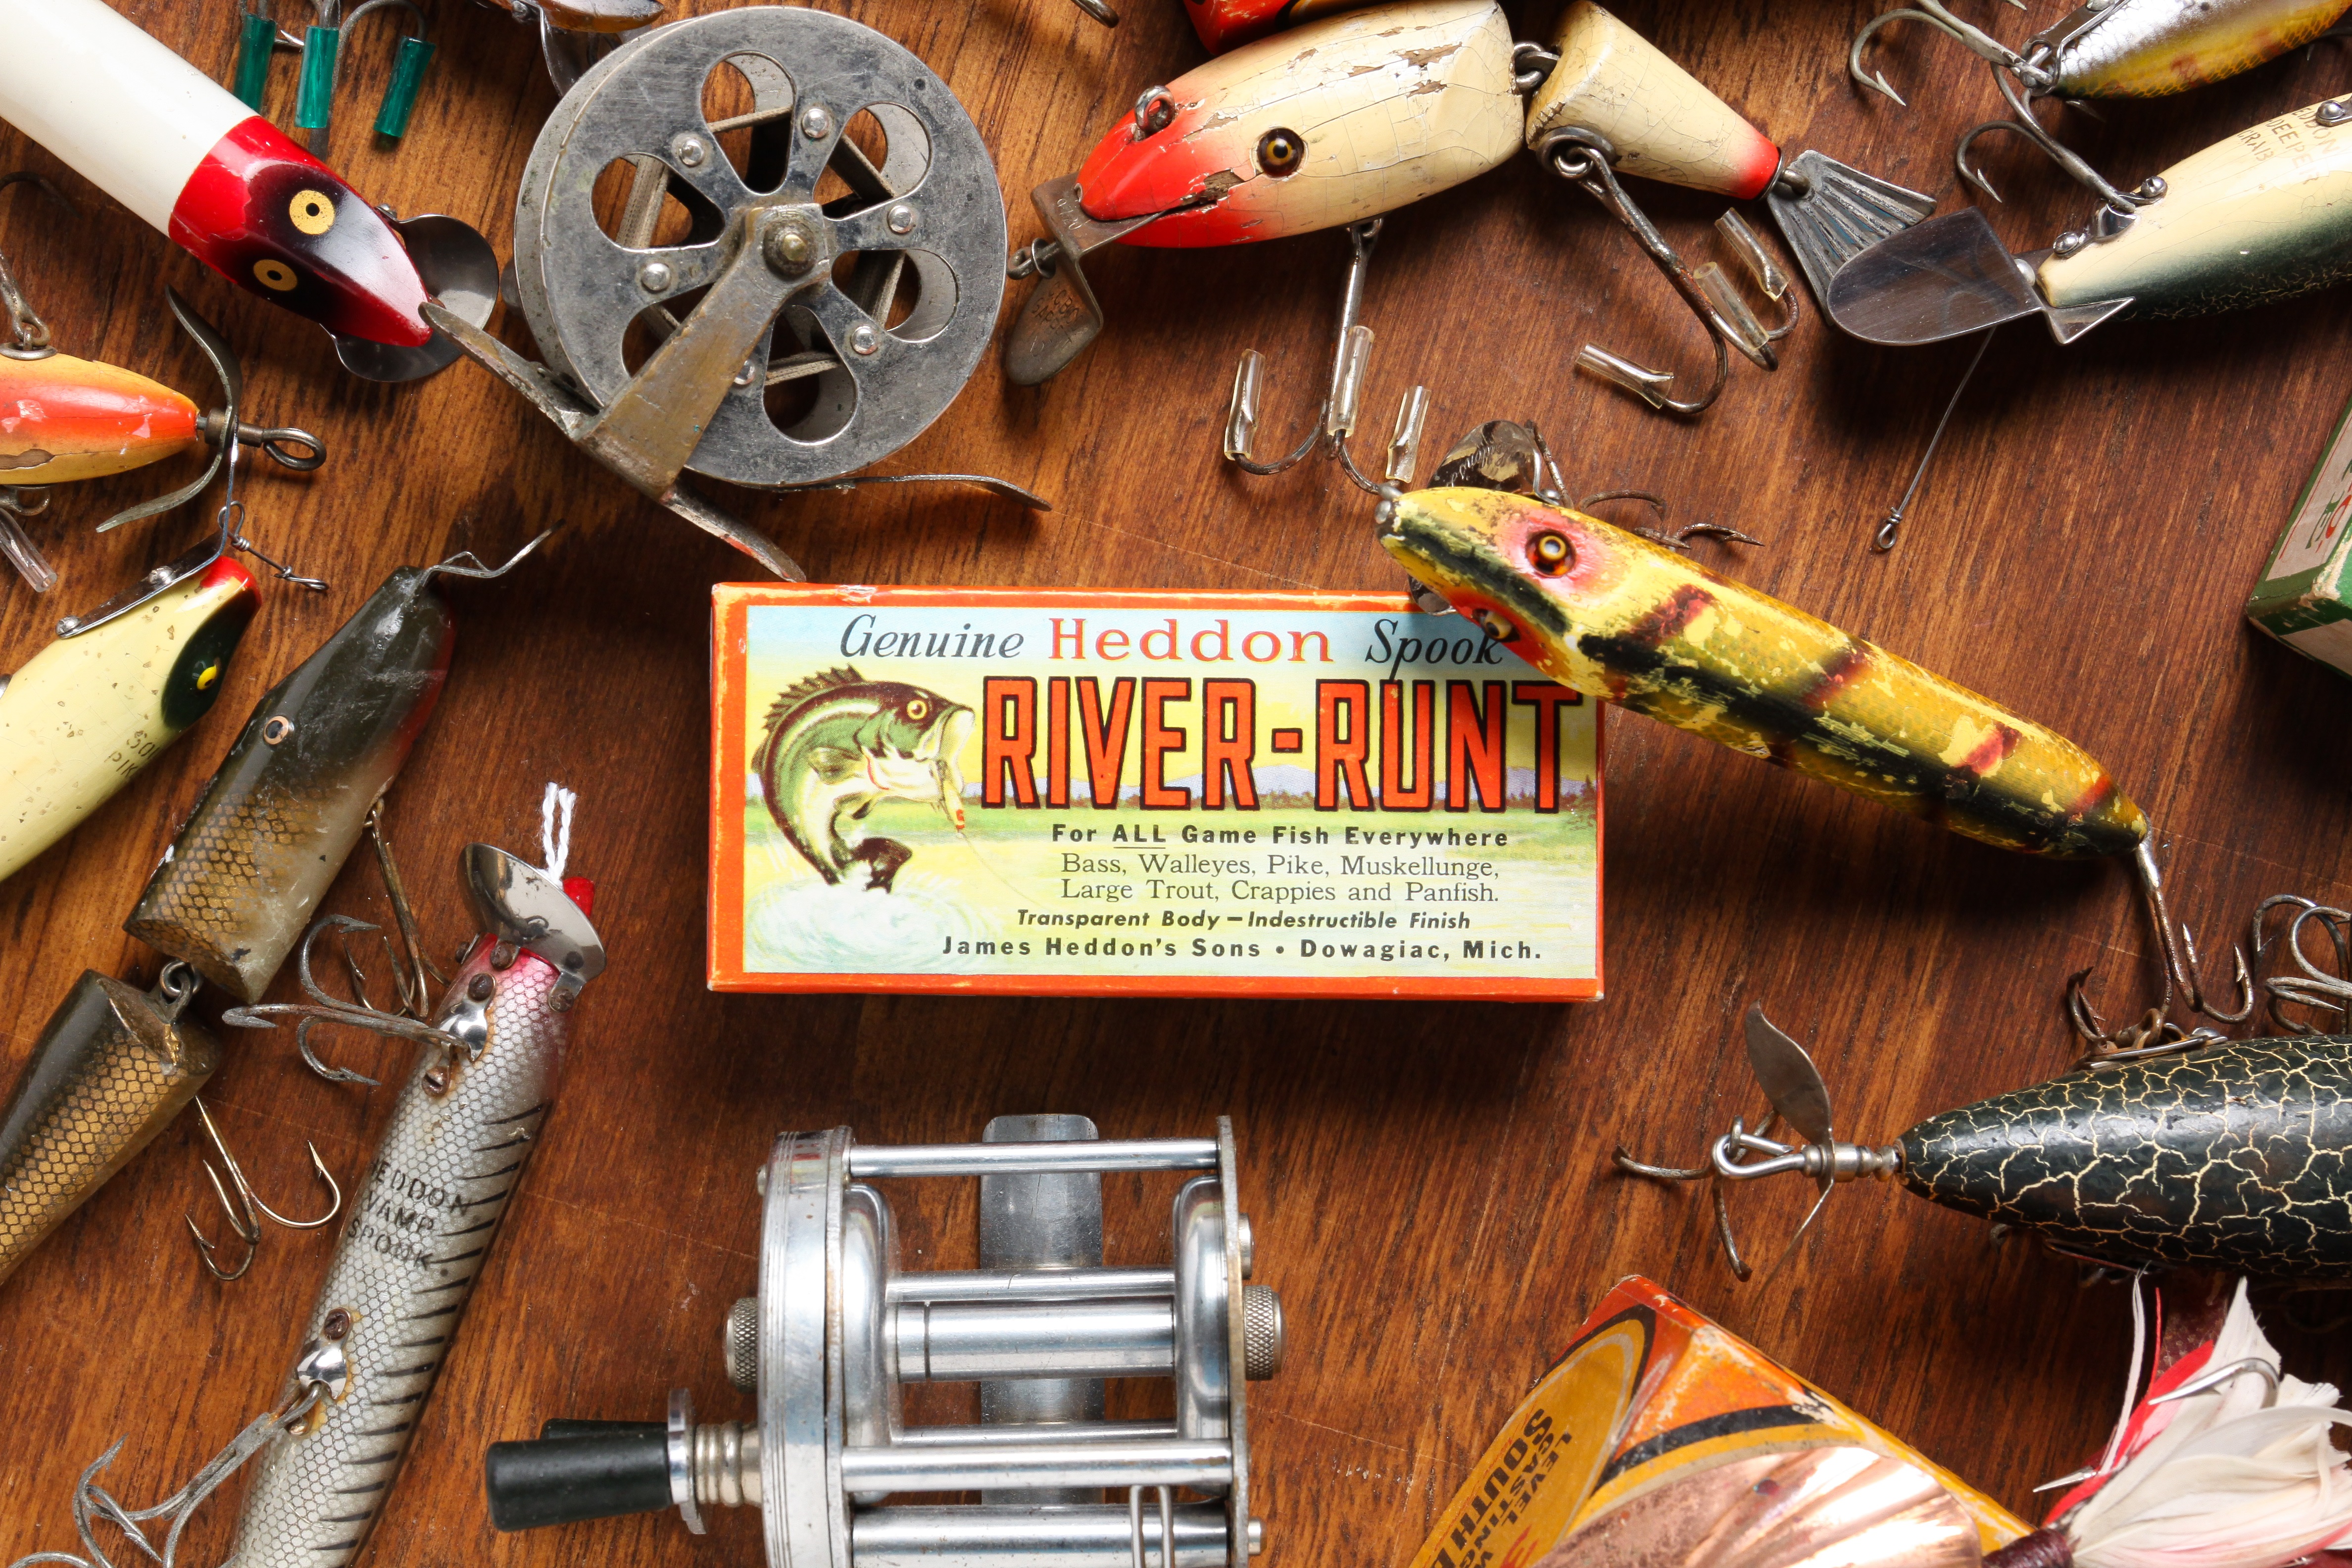 Antique Lure Show Coming to Buckeye Lake, Sports